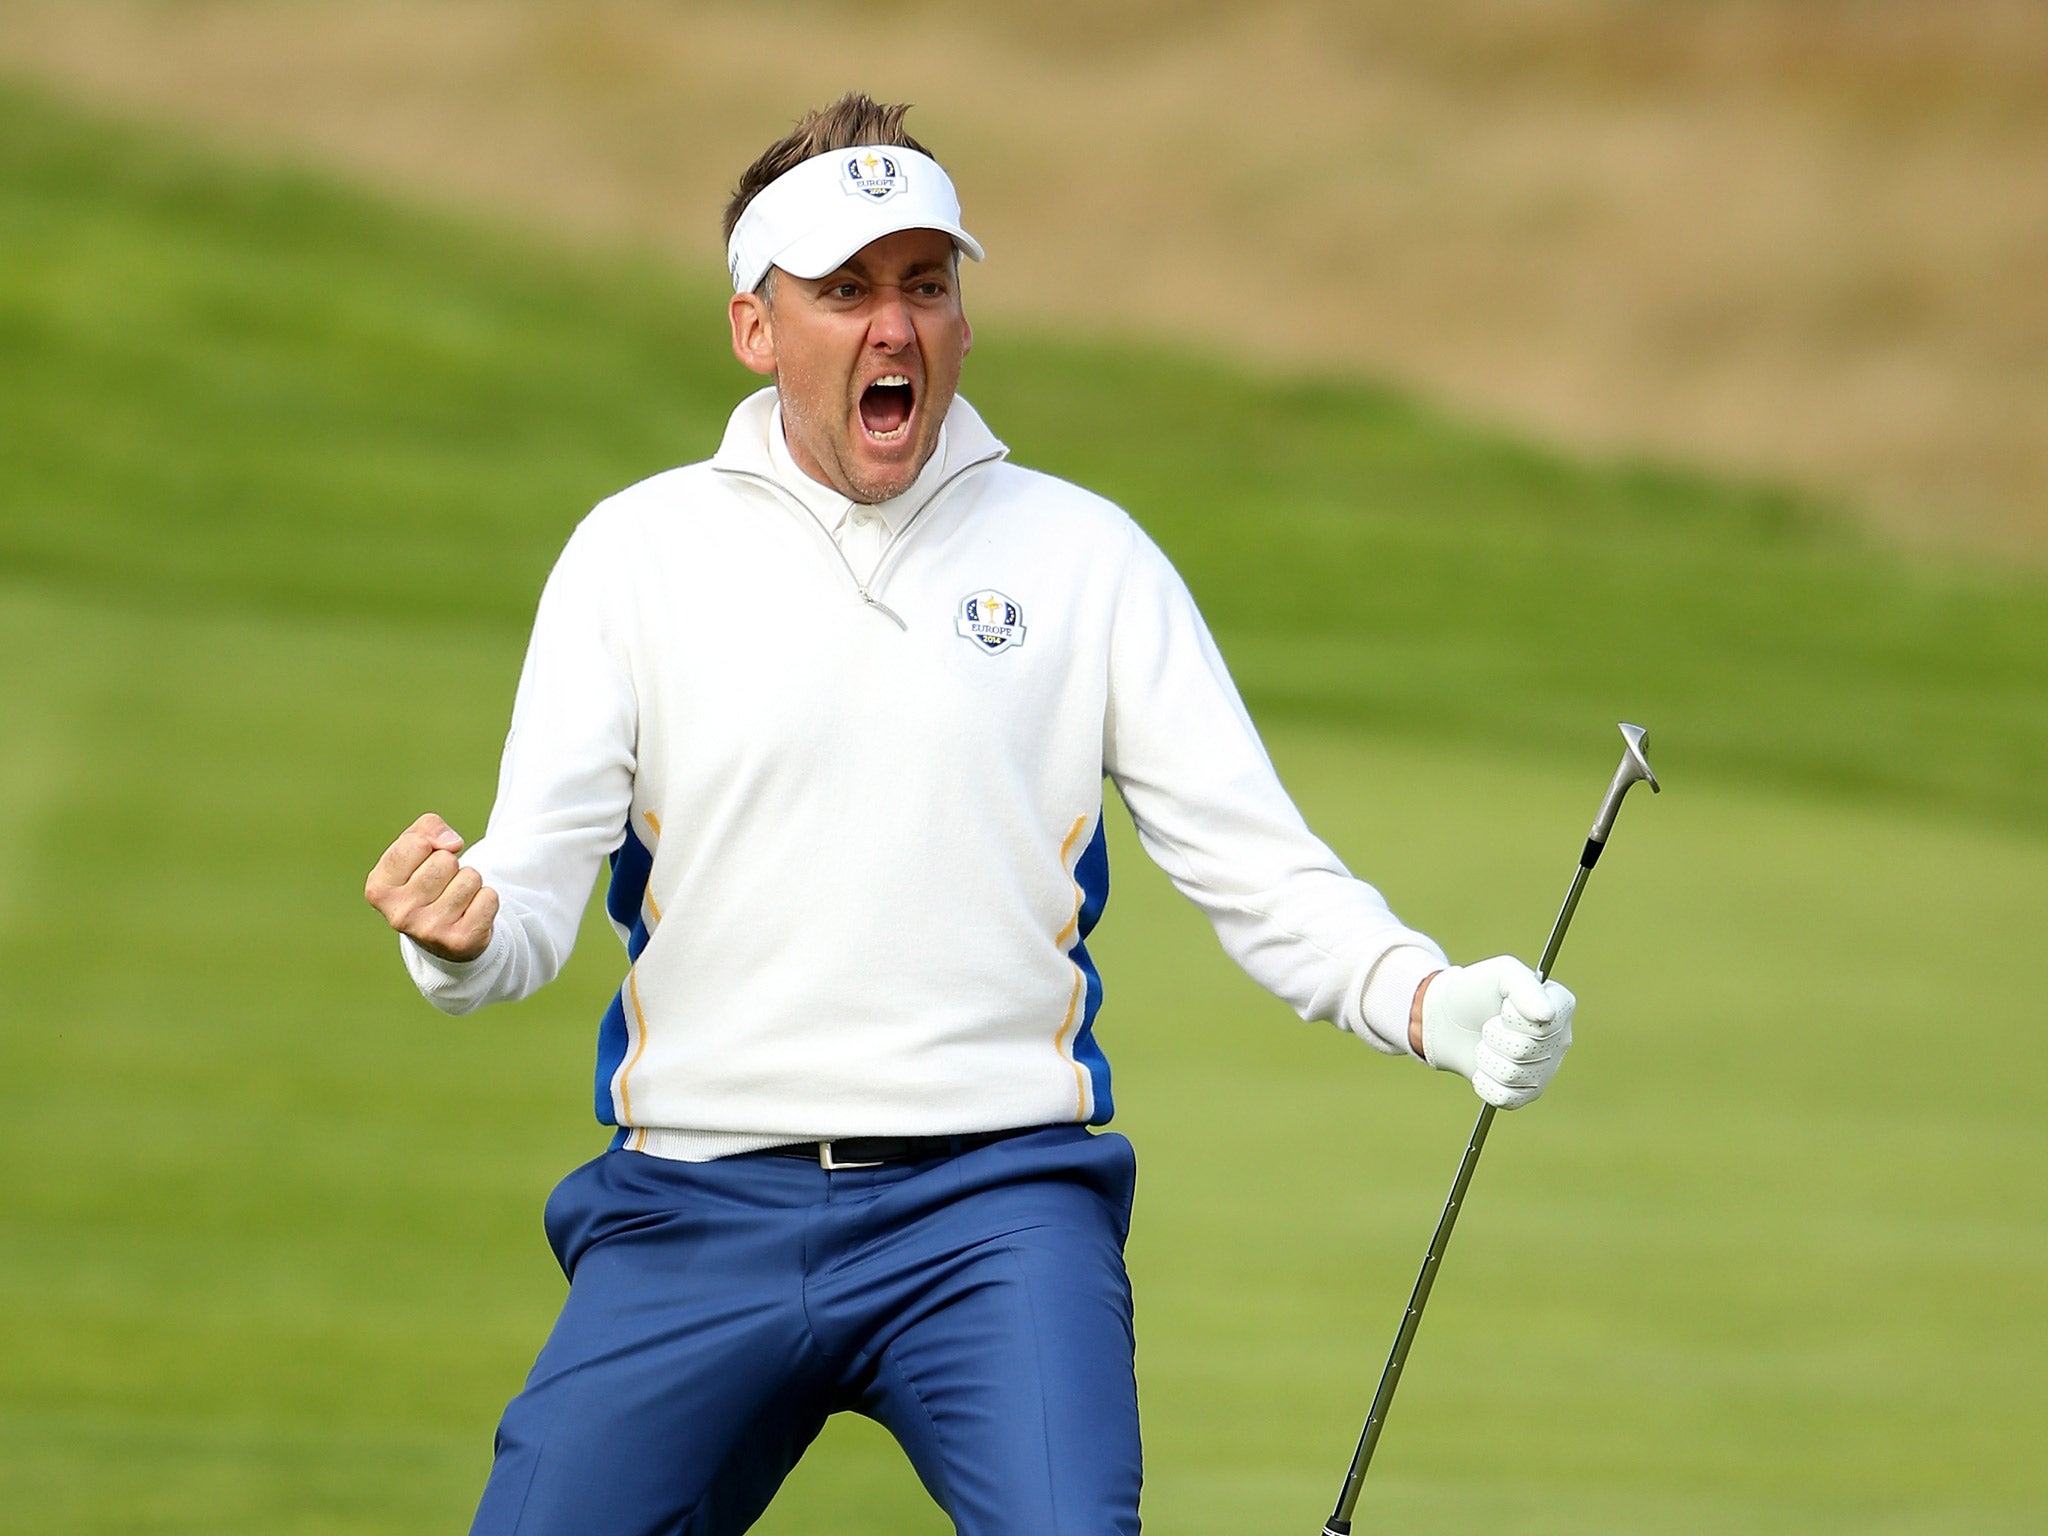 Ian Poulter says the rivalry makes the Ryder Cup ‘special’